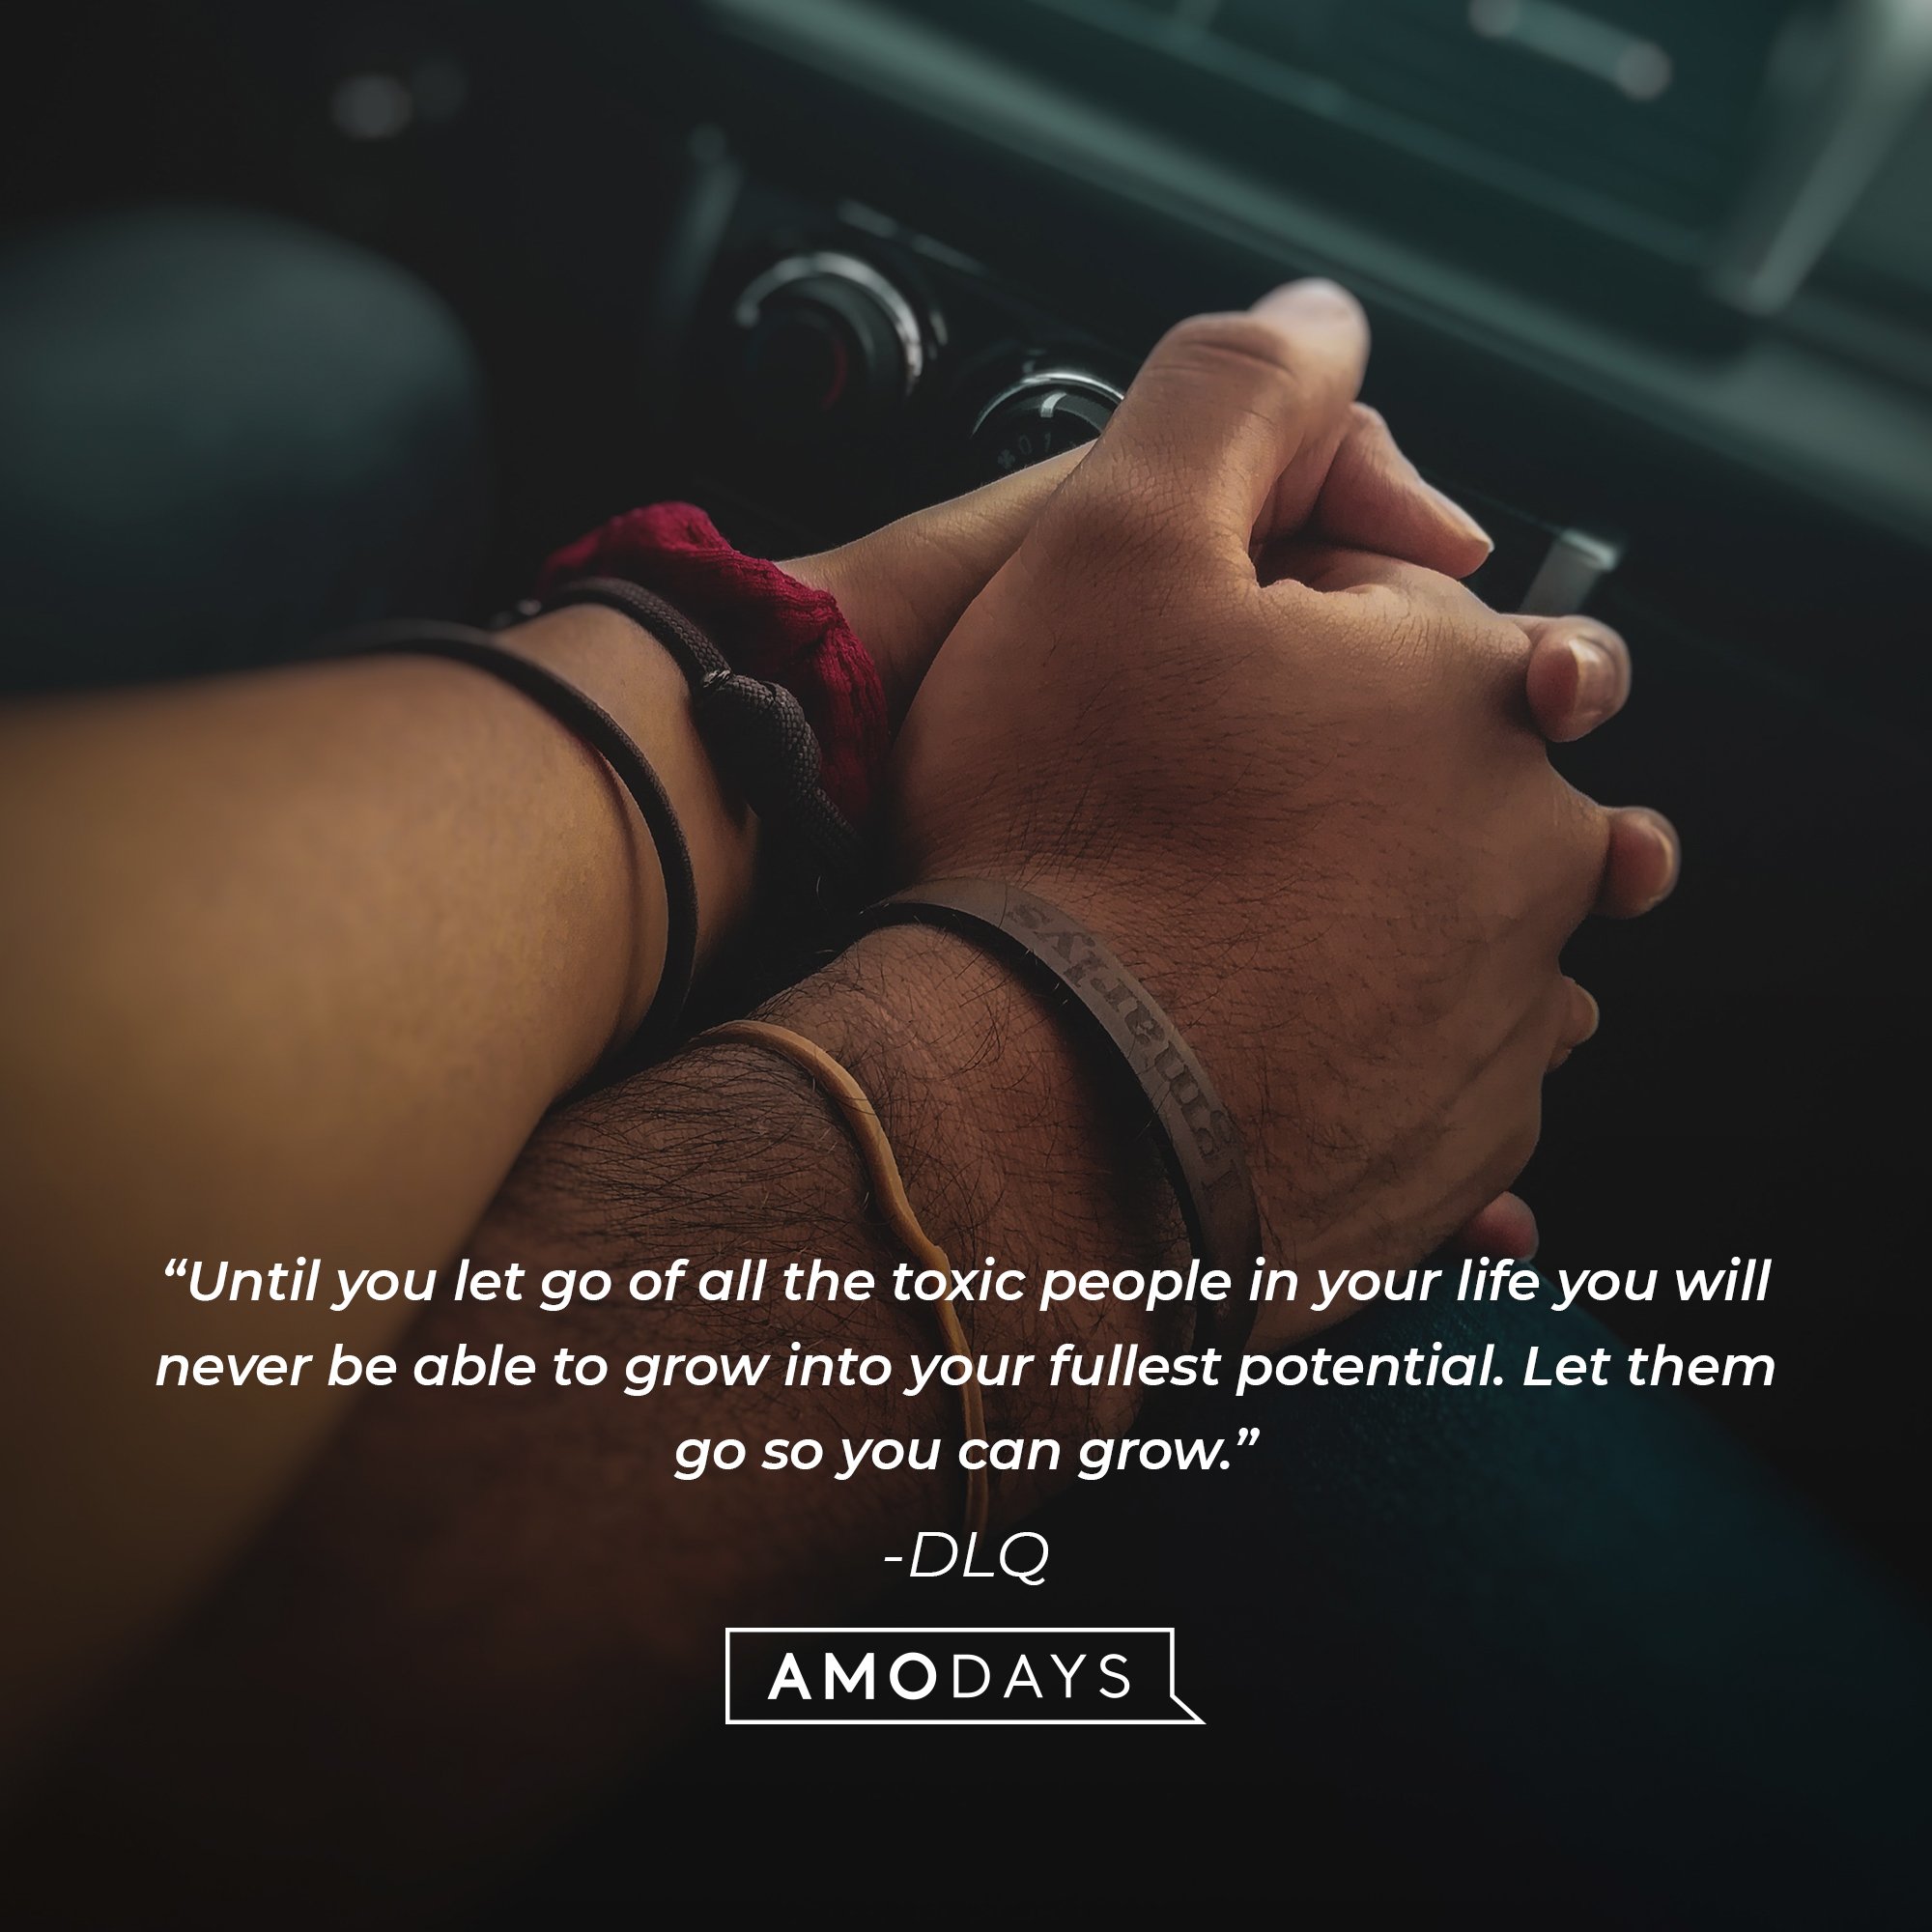 DLQ's quote: “Until you let go of all the toxic people in your life you will never be able to grow into your fullest potential. Let them go so you can grow.” | AmoDays